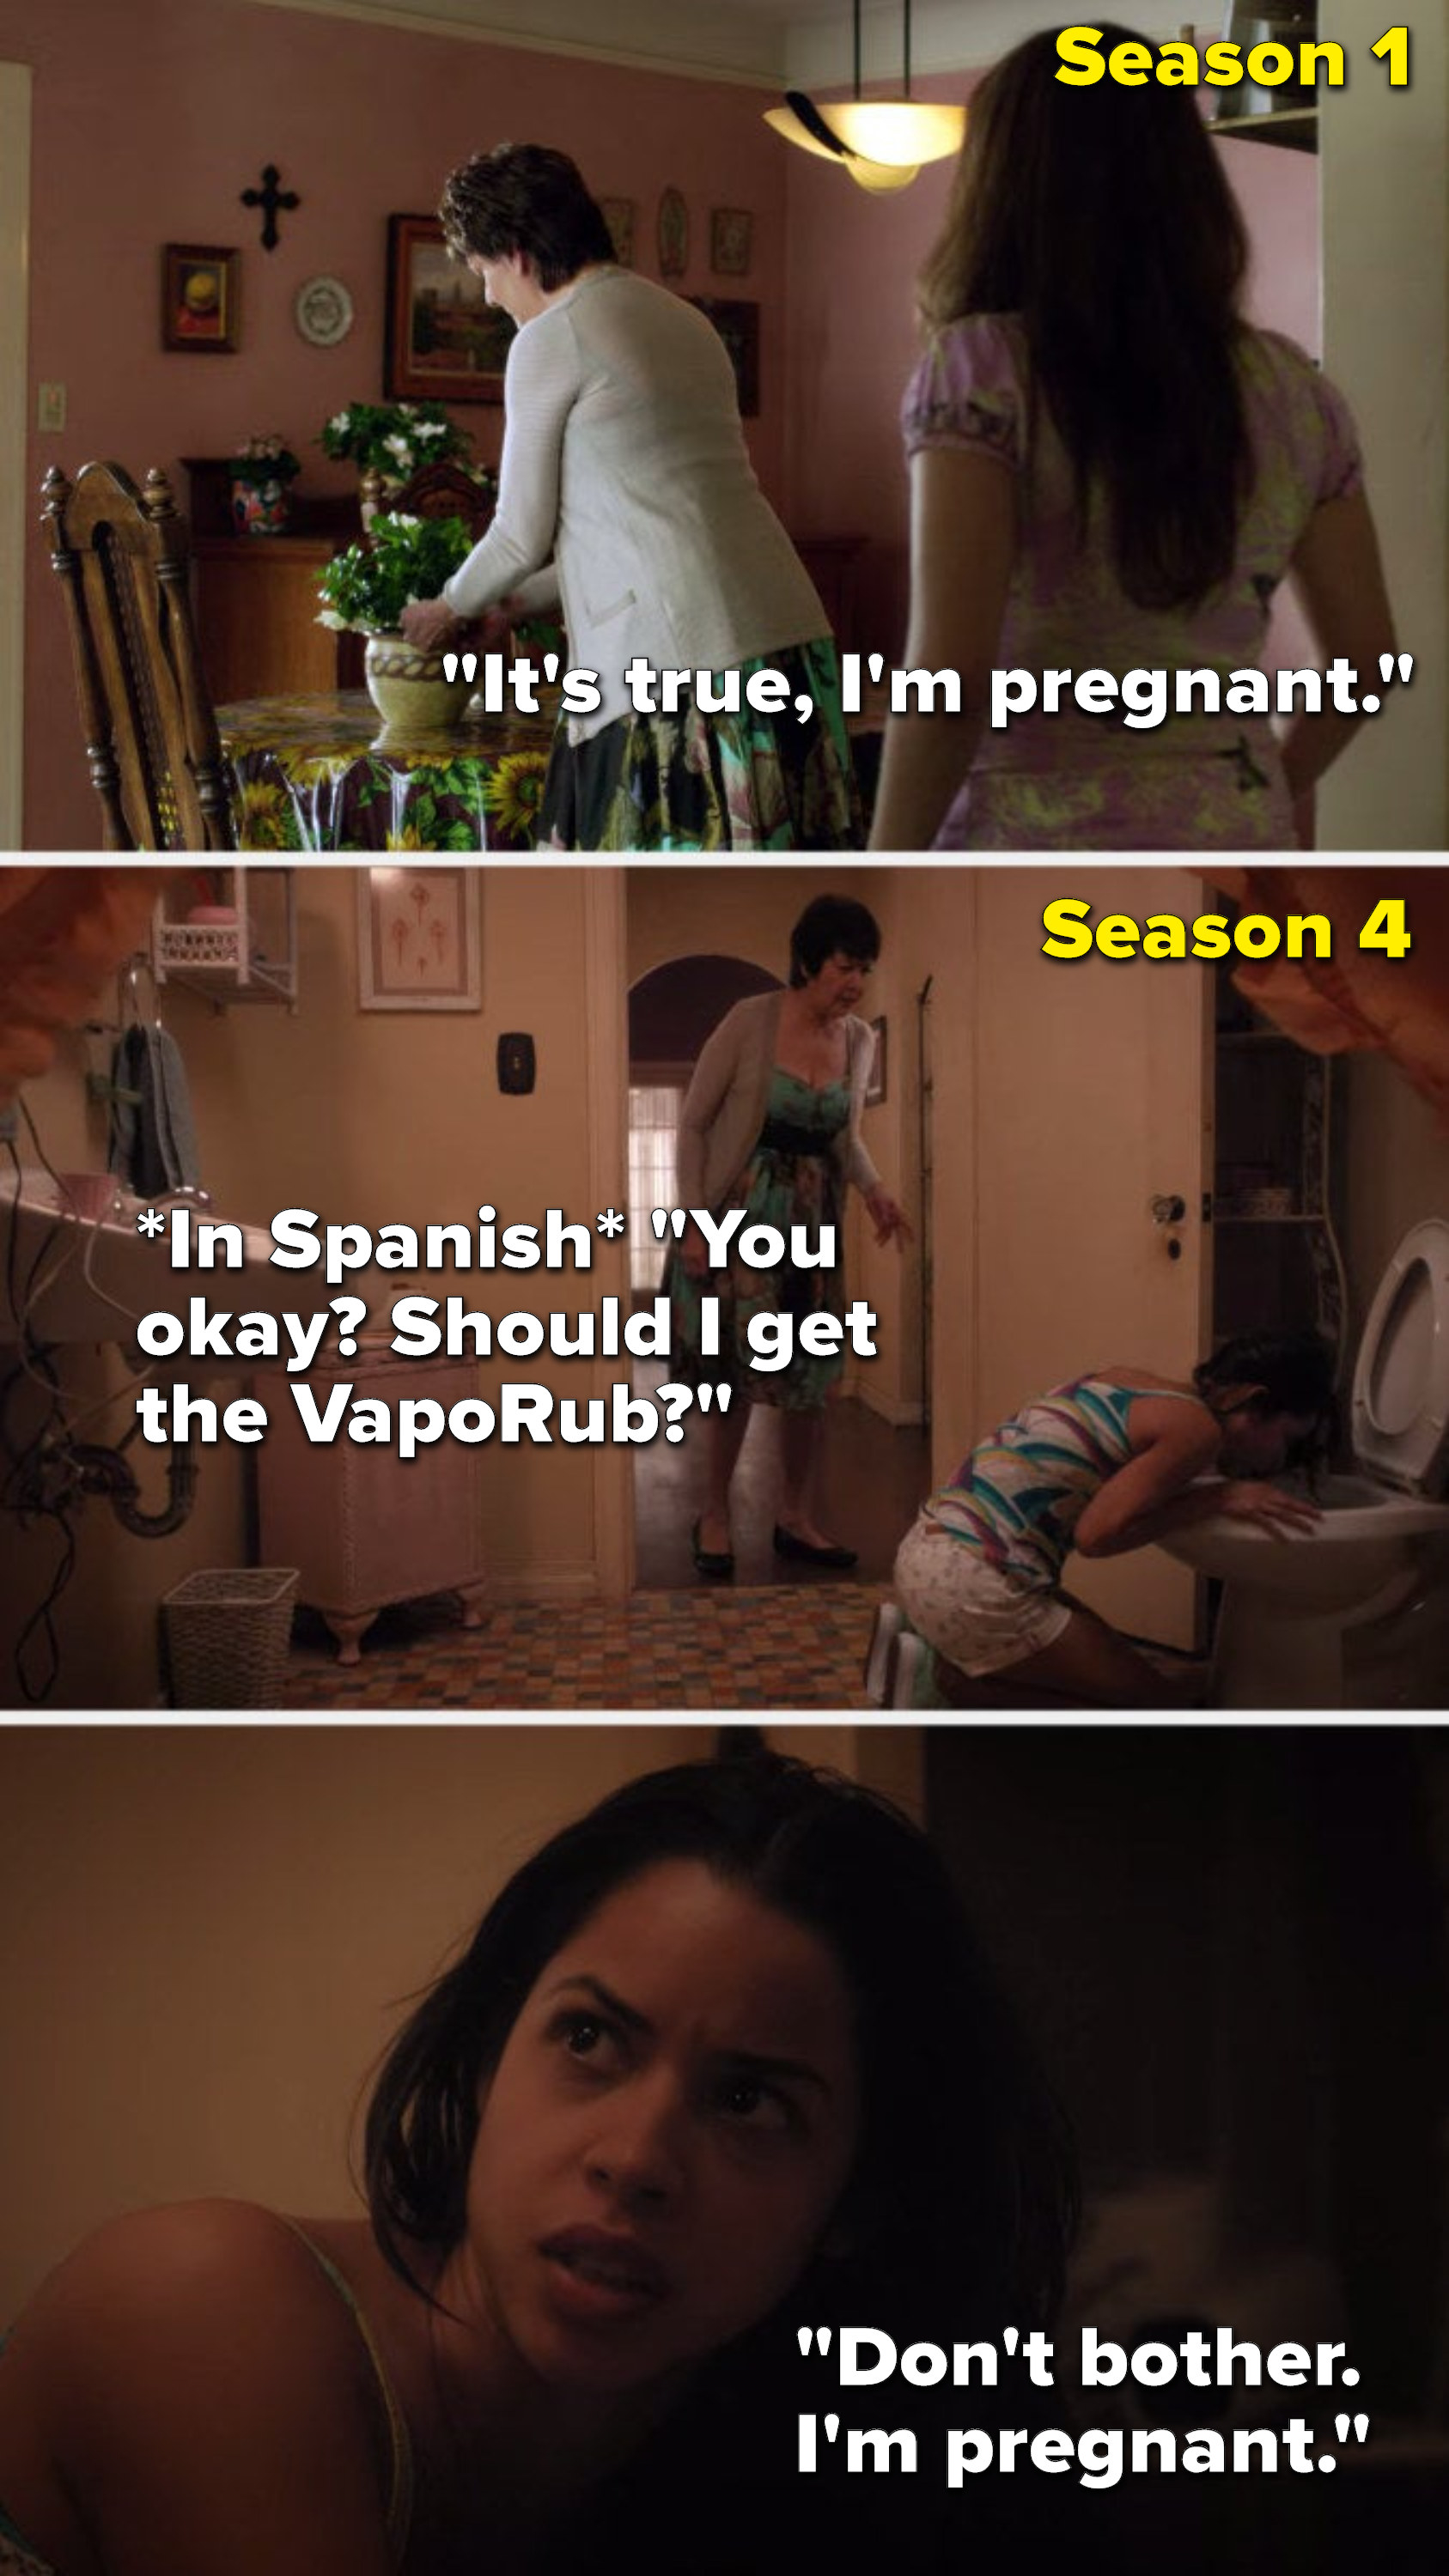 In Season 1, Xo says to Alba, &quot;It&#x27;s true, I&#x27;m pregnant,&quot; then in Season 4 Xo is vomiting and Alba asks, &quot;You okay, should I get the VapoRub,&quot; but Xo says, &quot;Don&#x27;t bother, I&#x27;m pregnant&quot;